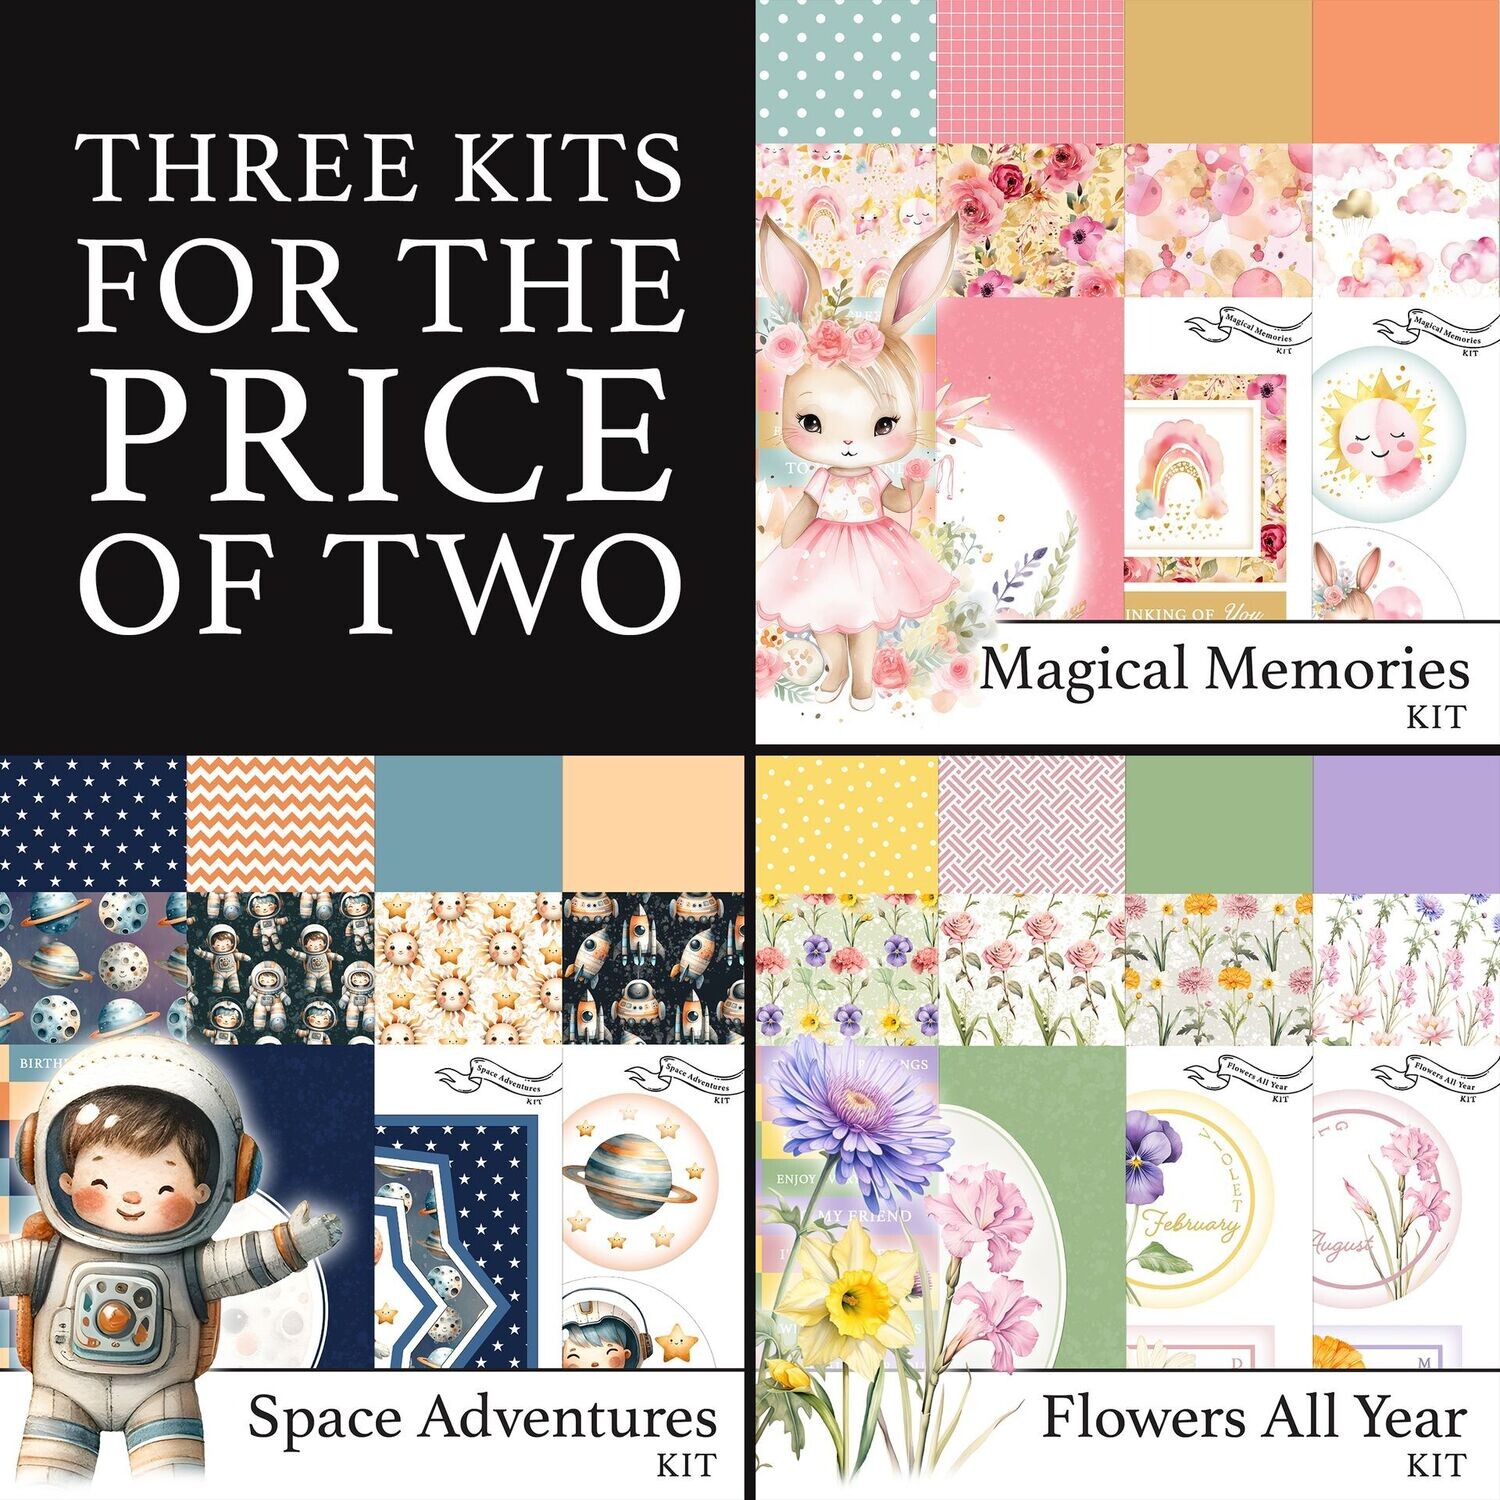 3 for 2 - Flowers All Year Digital Kit, Magical Memories Digital Kit & Space Adventures Digital Kit